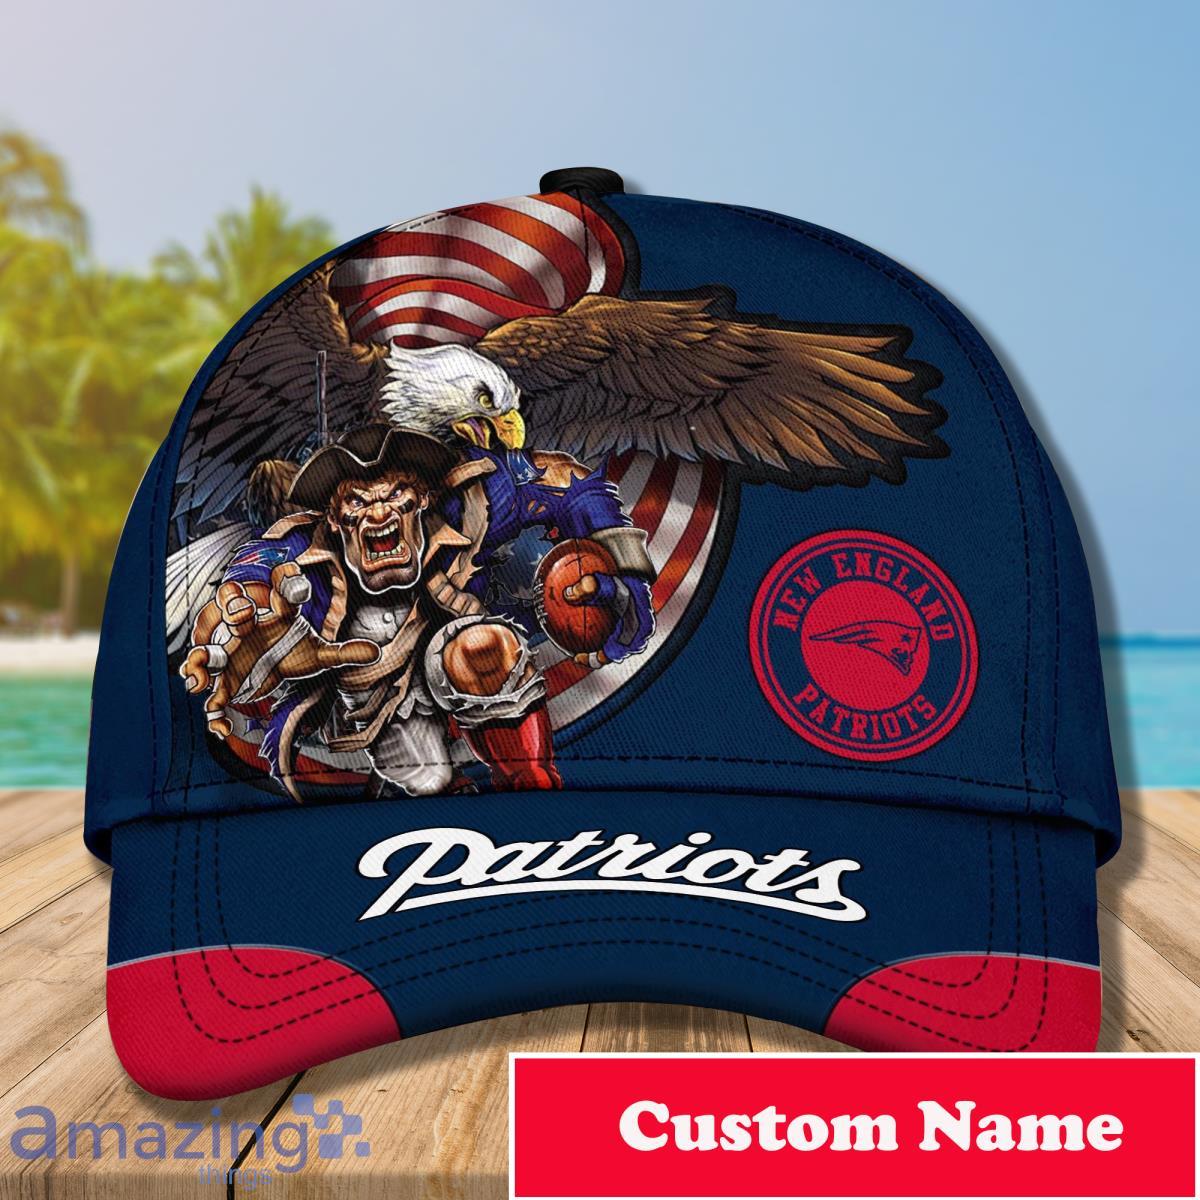 New England Patriots NFL Custom Name Cap For Men And Women Style Gift For  True Fans